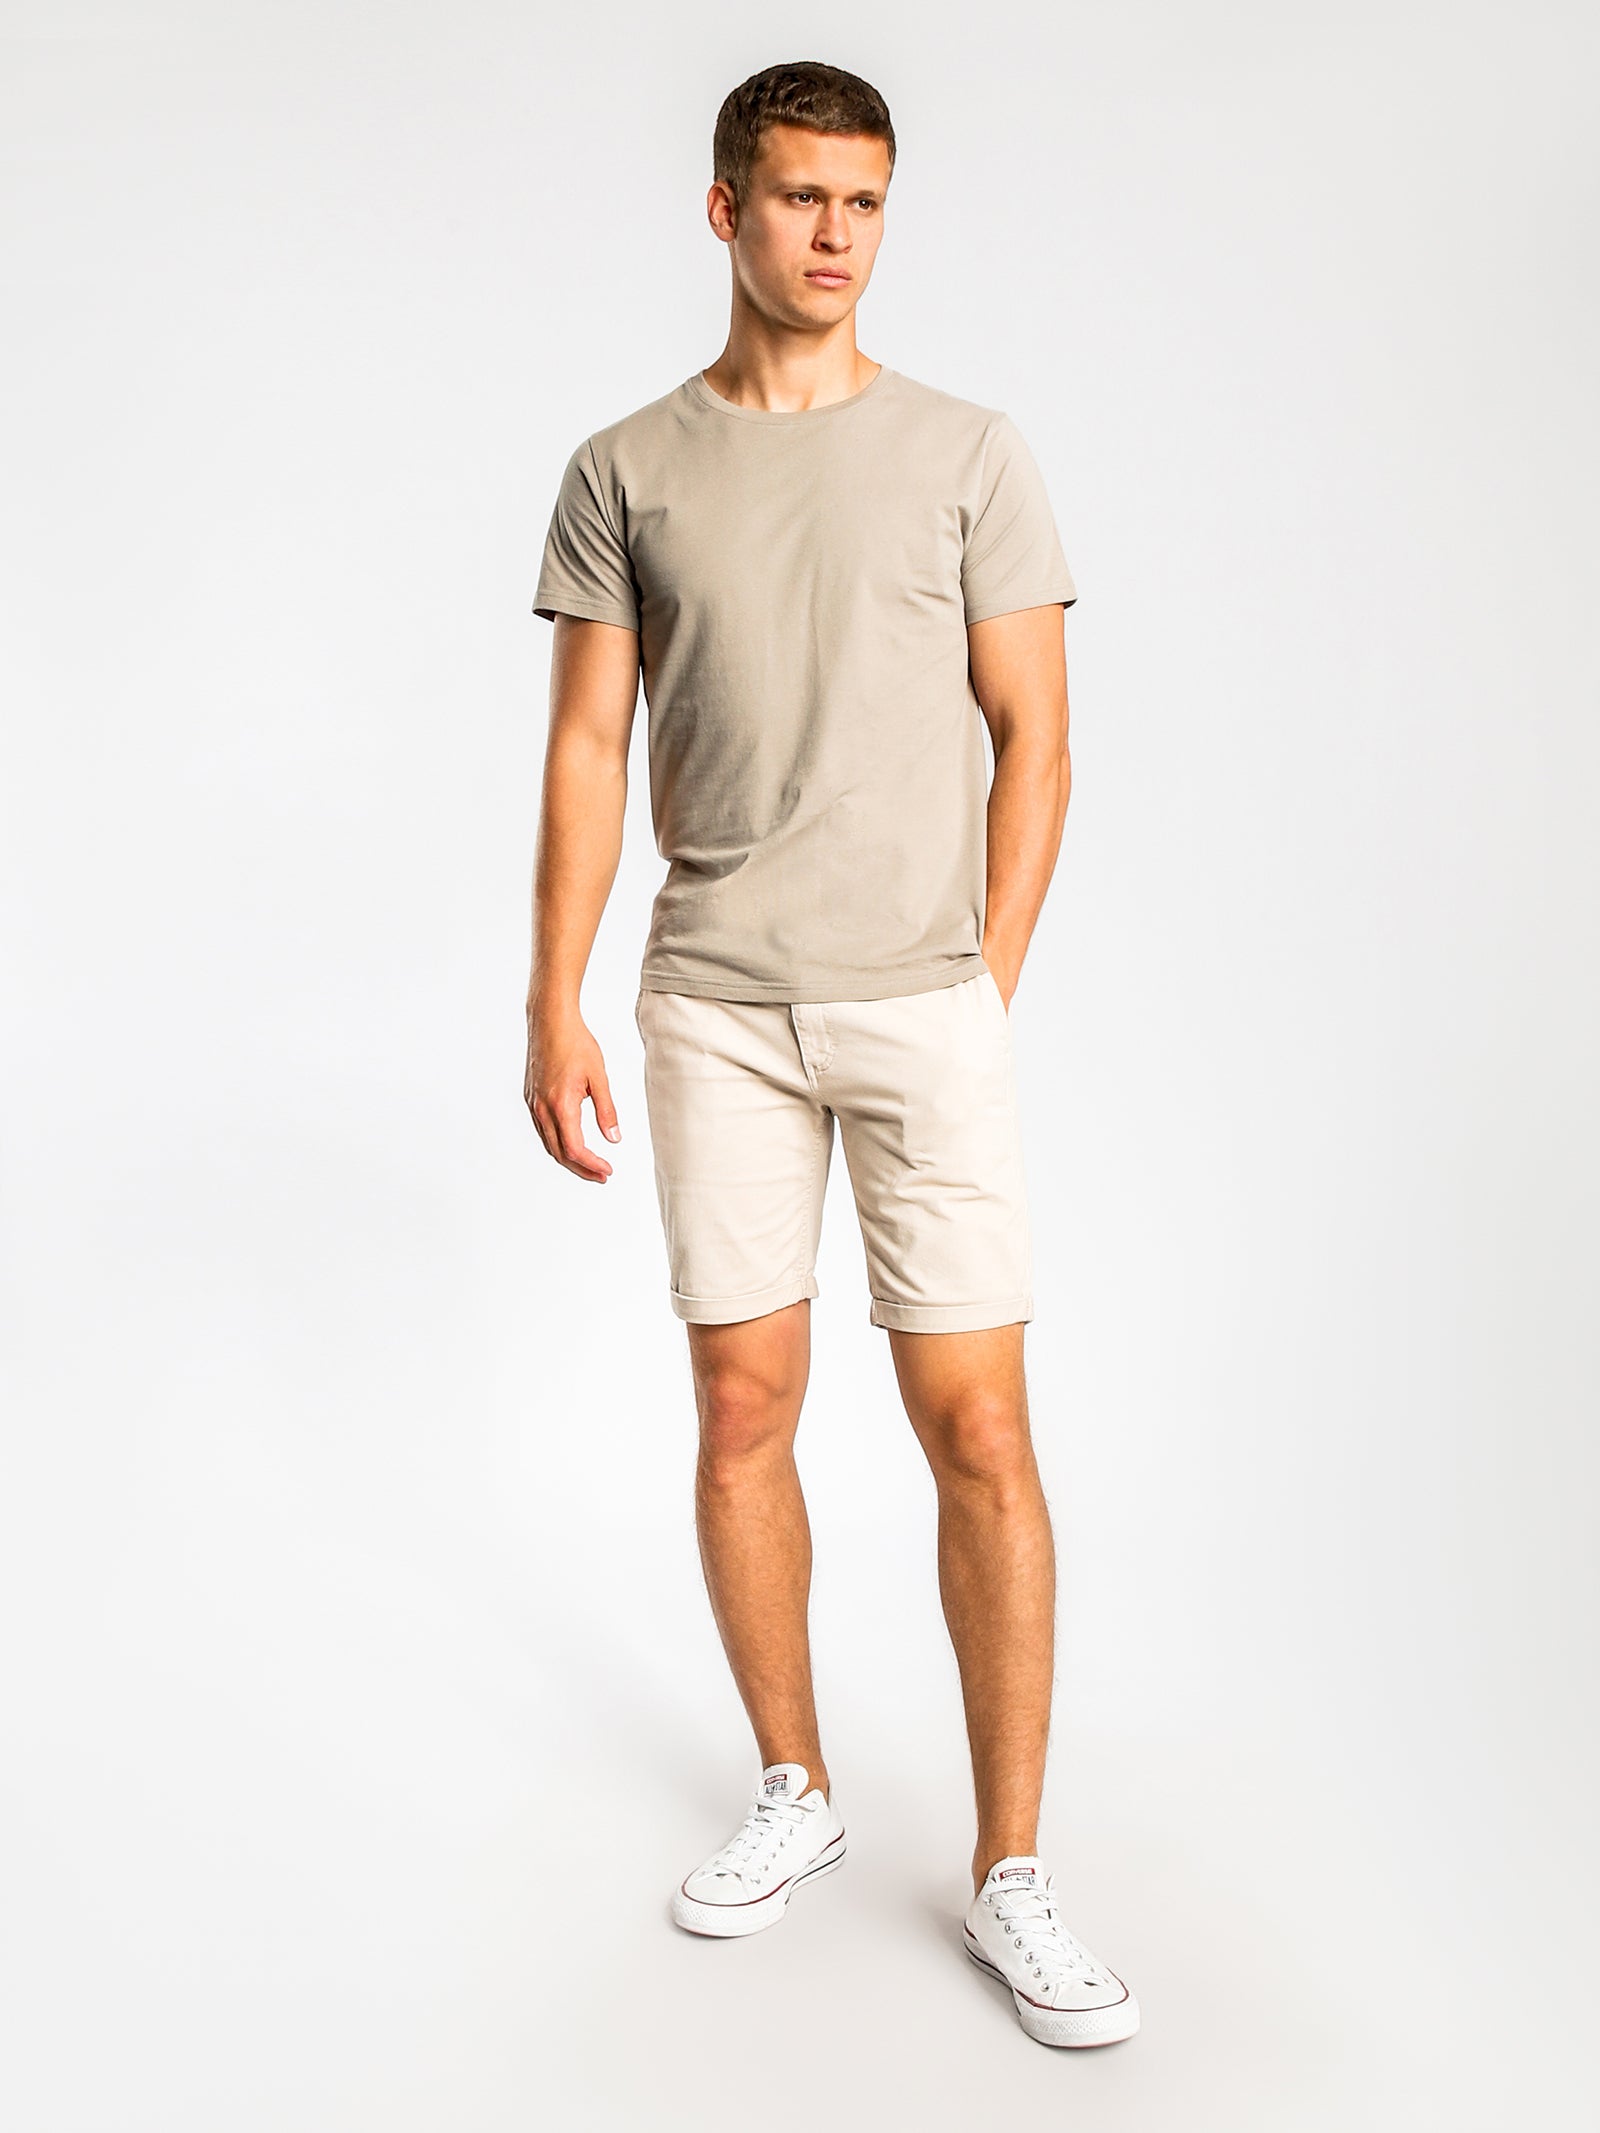 Malabar Chino Short in Navy or Stone or Army - Milu James St